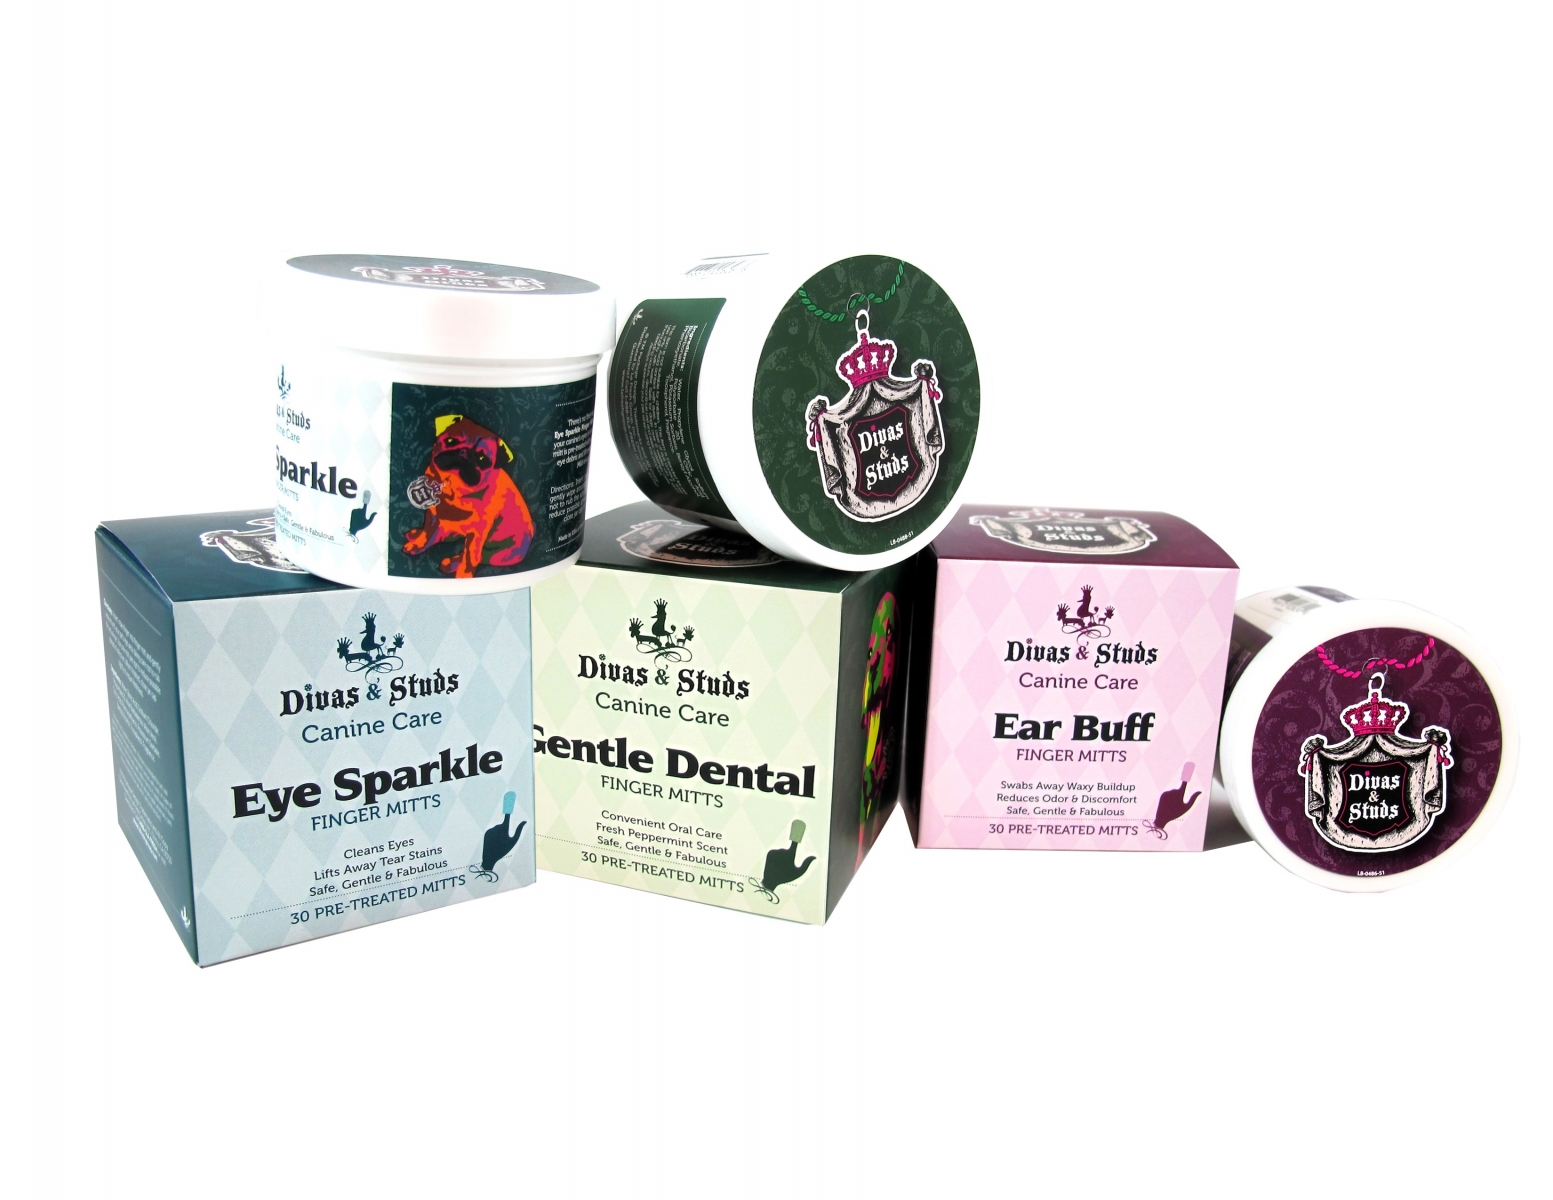 Eye, Ear and Dental Canine Care products